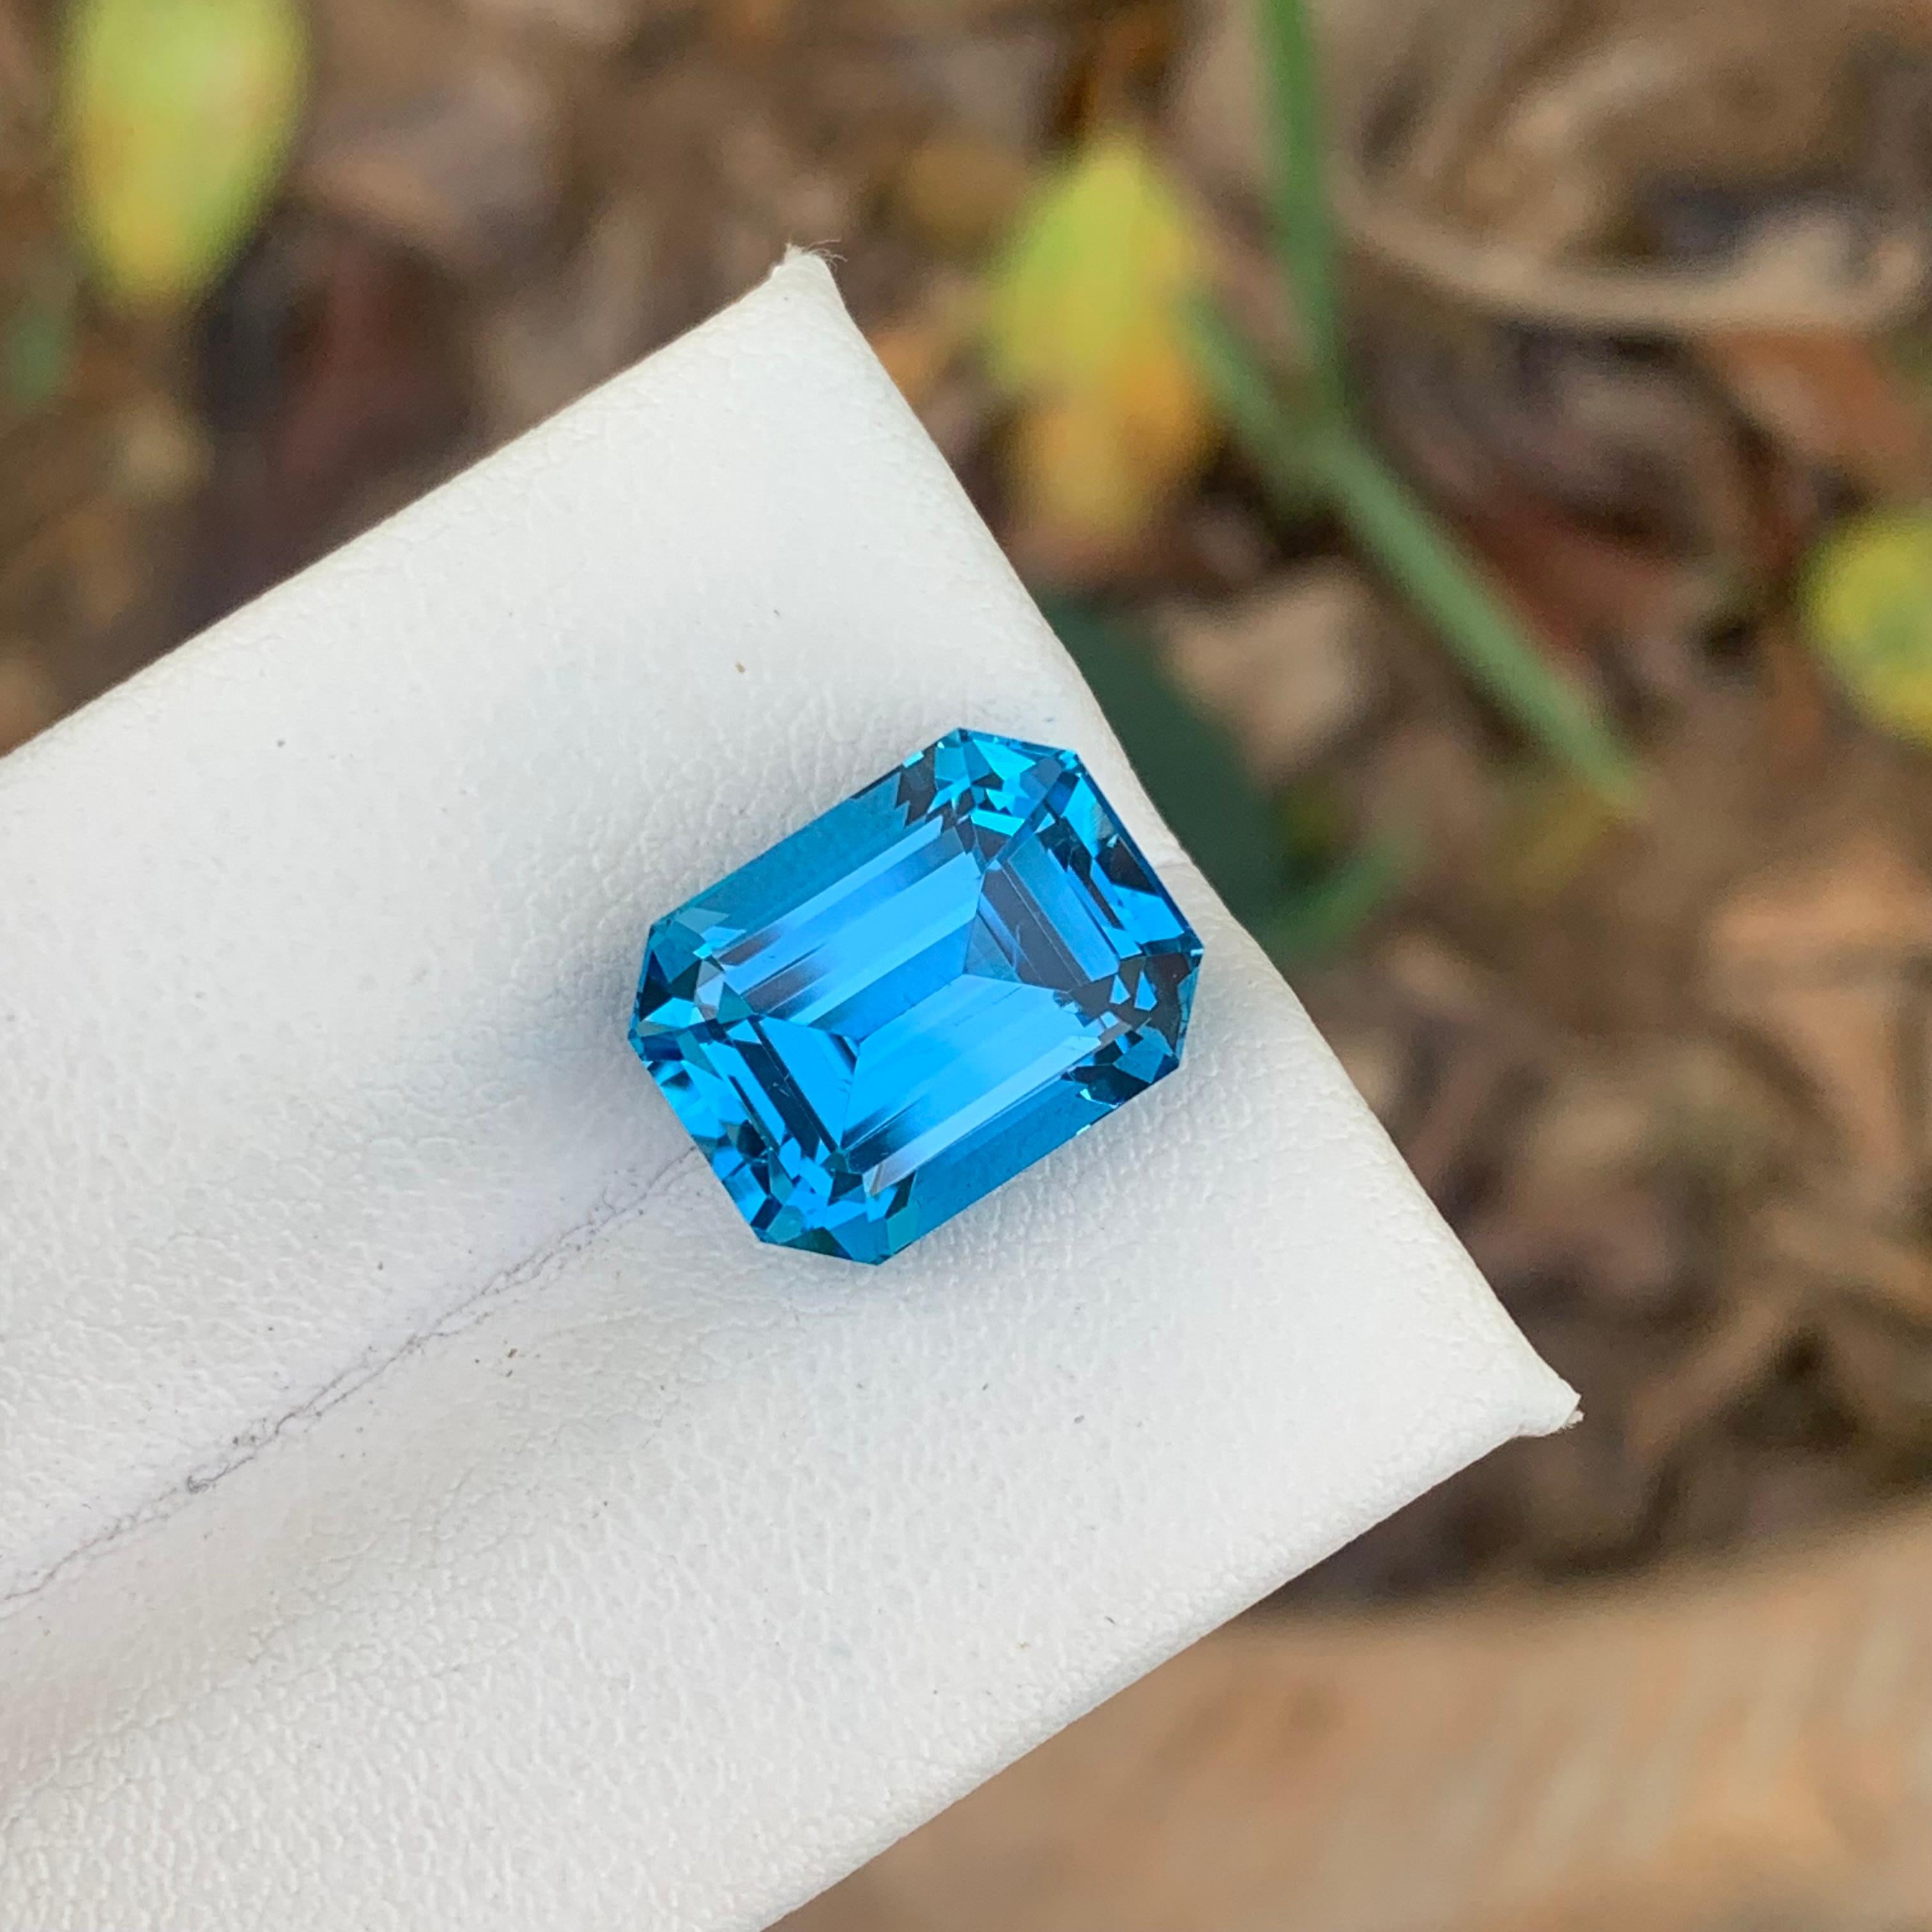 Gorgeous Intense Blue Loose Electric Blue Topaz from Brazil 9.85 Carat Ring Gem For Sale 6